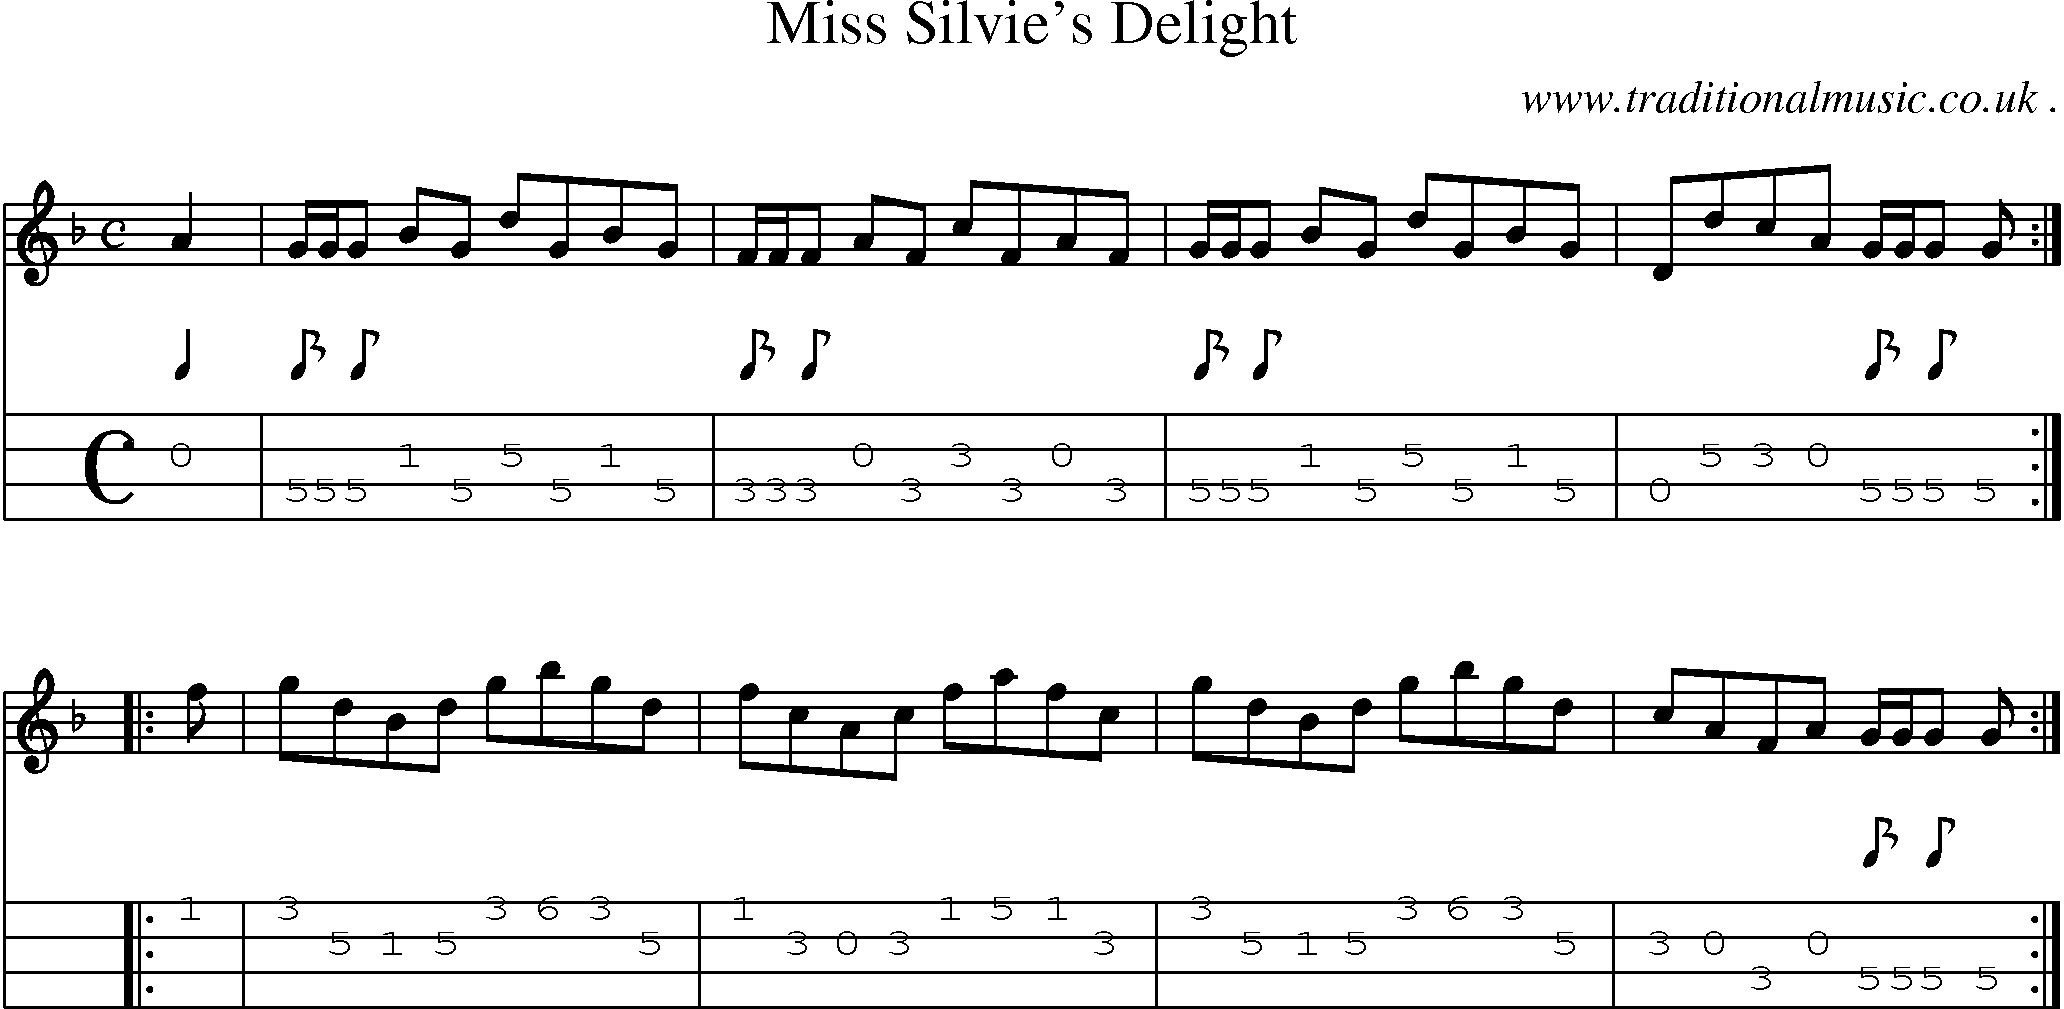 Sheet-music  score, Chords and Mandolin Tabs for Miss Silvies Delight